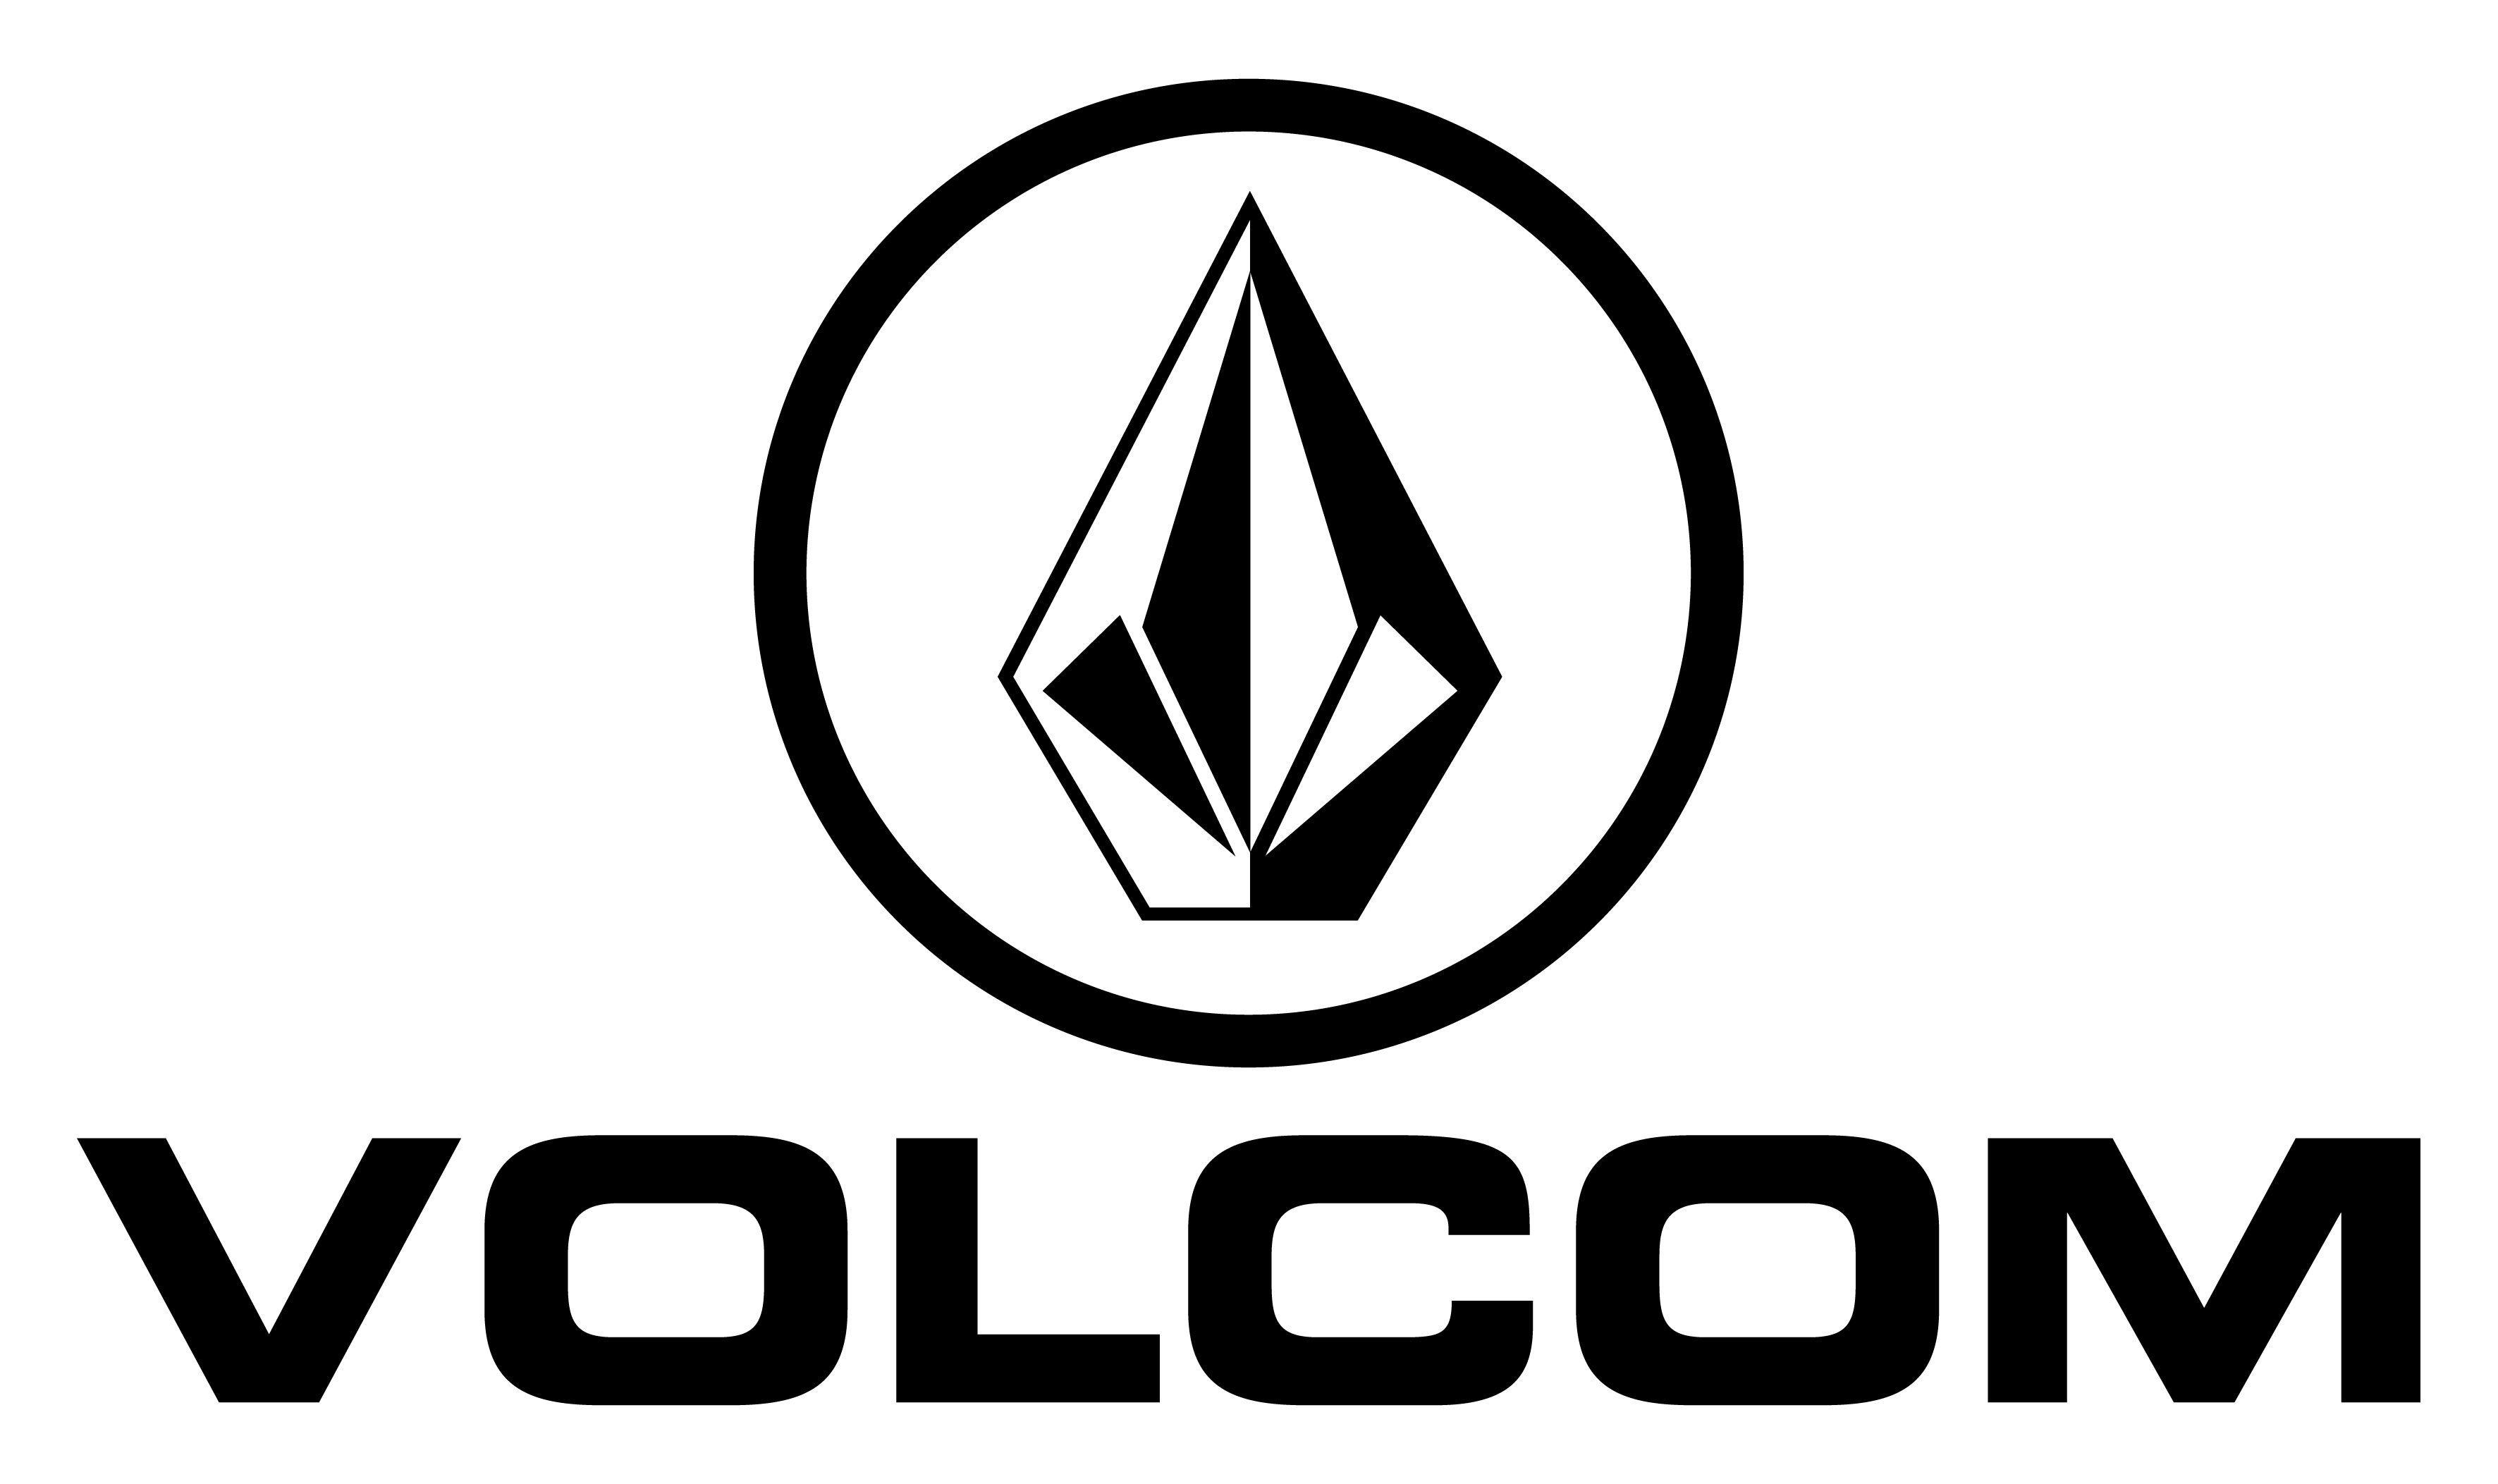 Volcom Logo - Volcom Logo HD Wallpaper Picture Background Image Collection